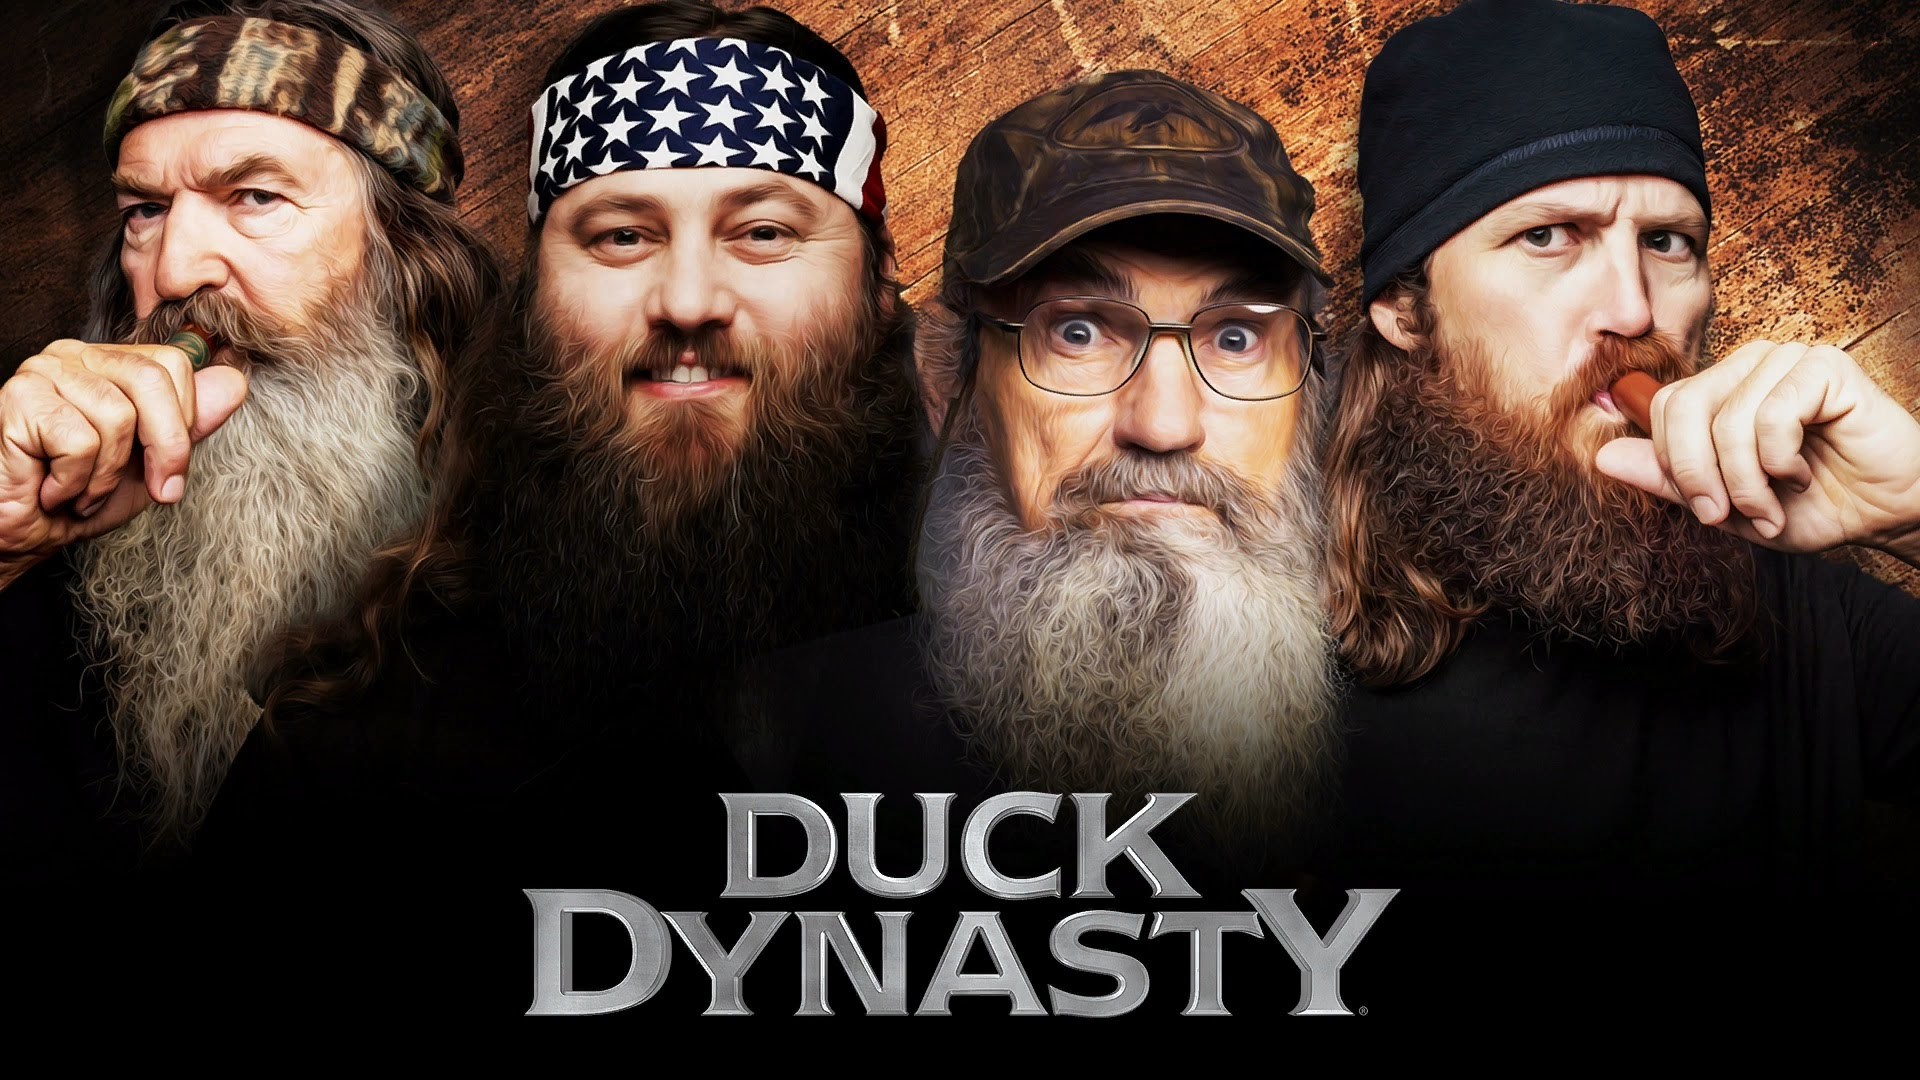 1920x1080 Duck Dynasty - PS4 gameplay 1080p60 â